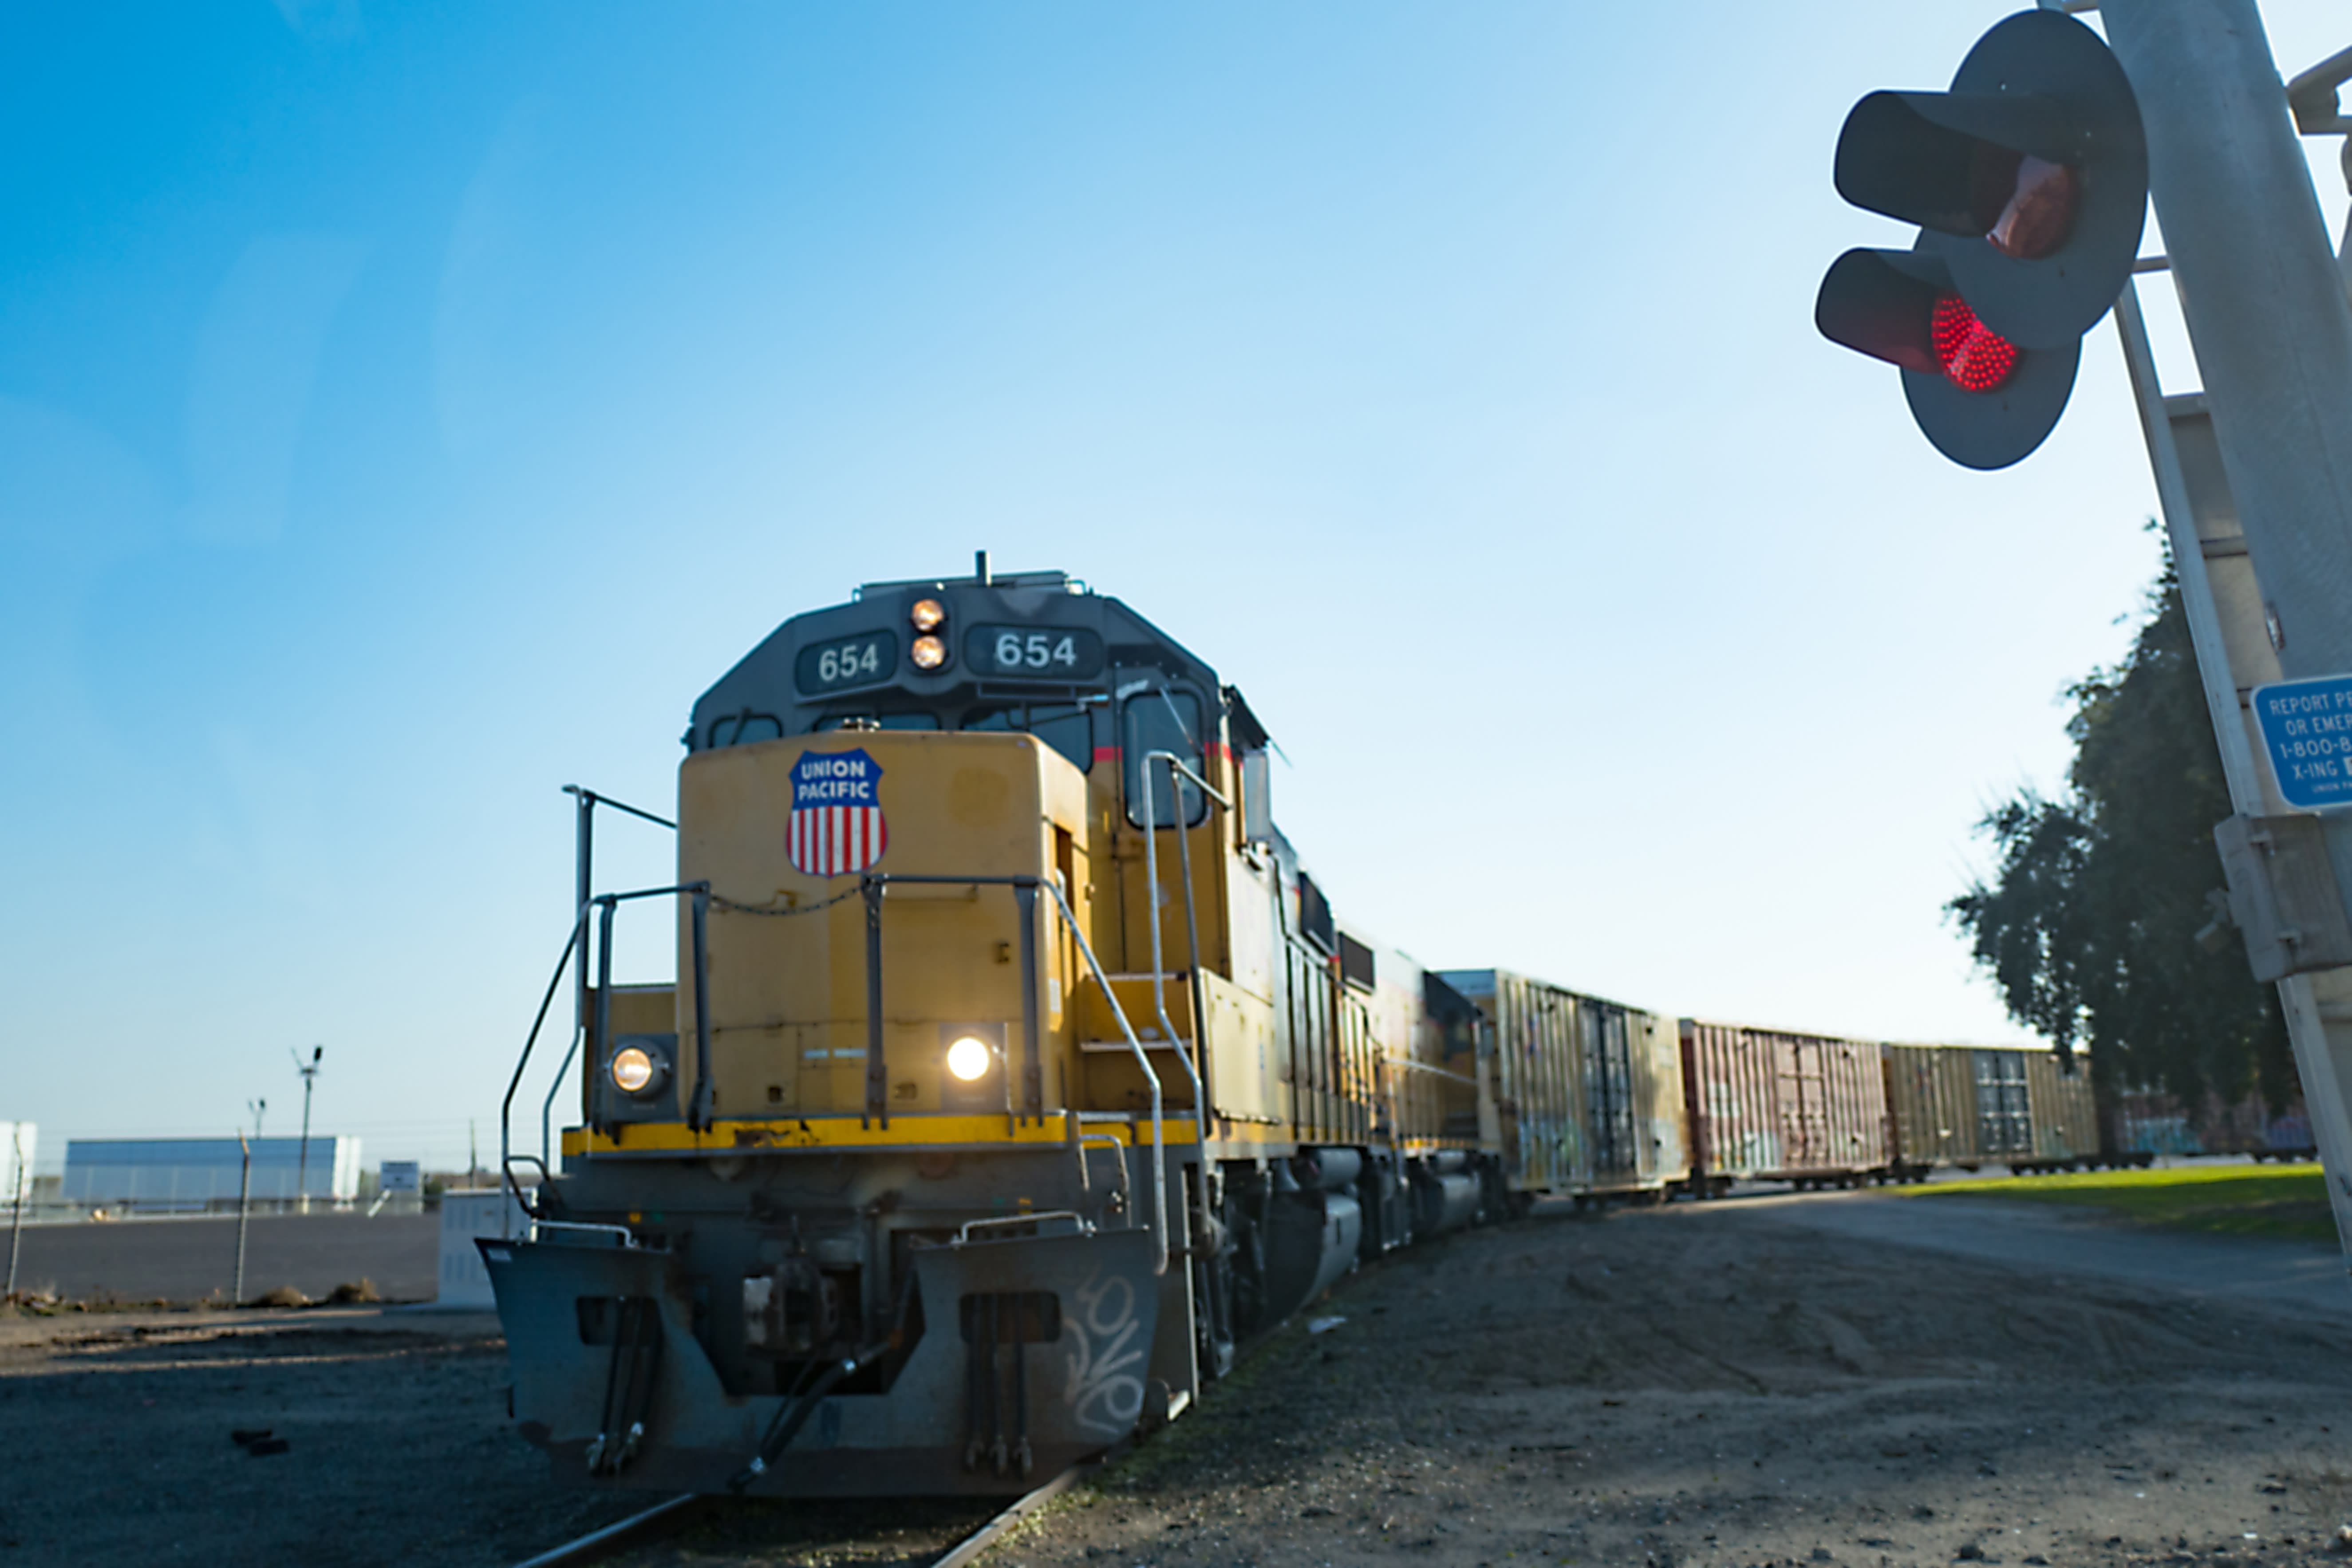 Wall Street gets bullish railroads on Monday, especially this one in particular